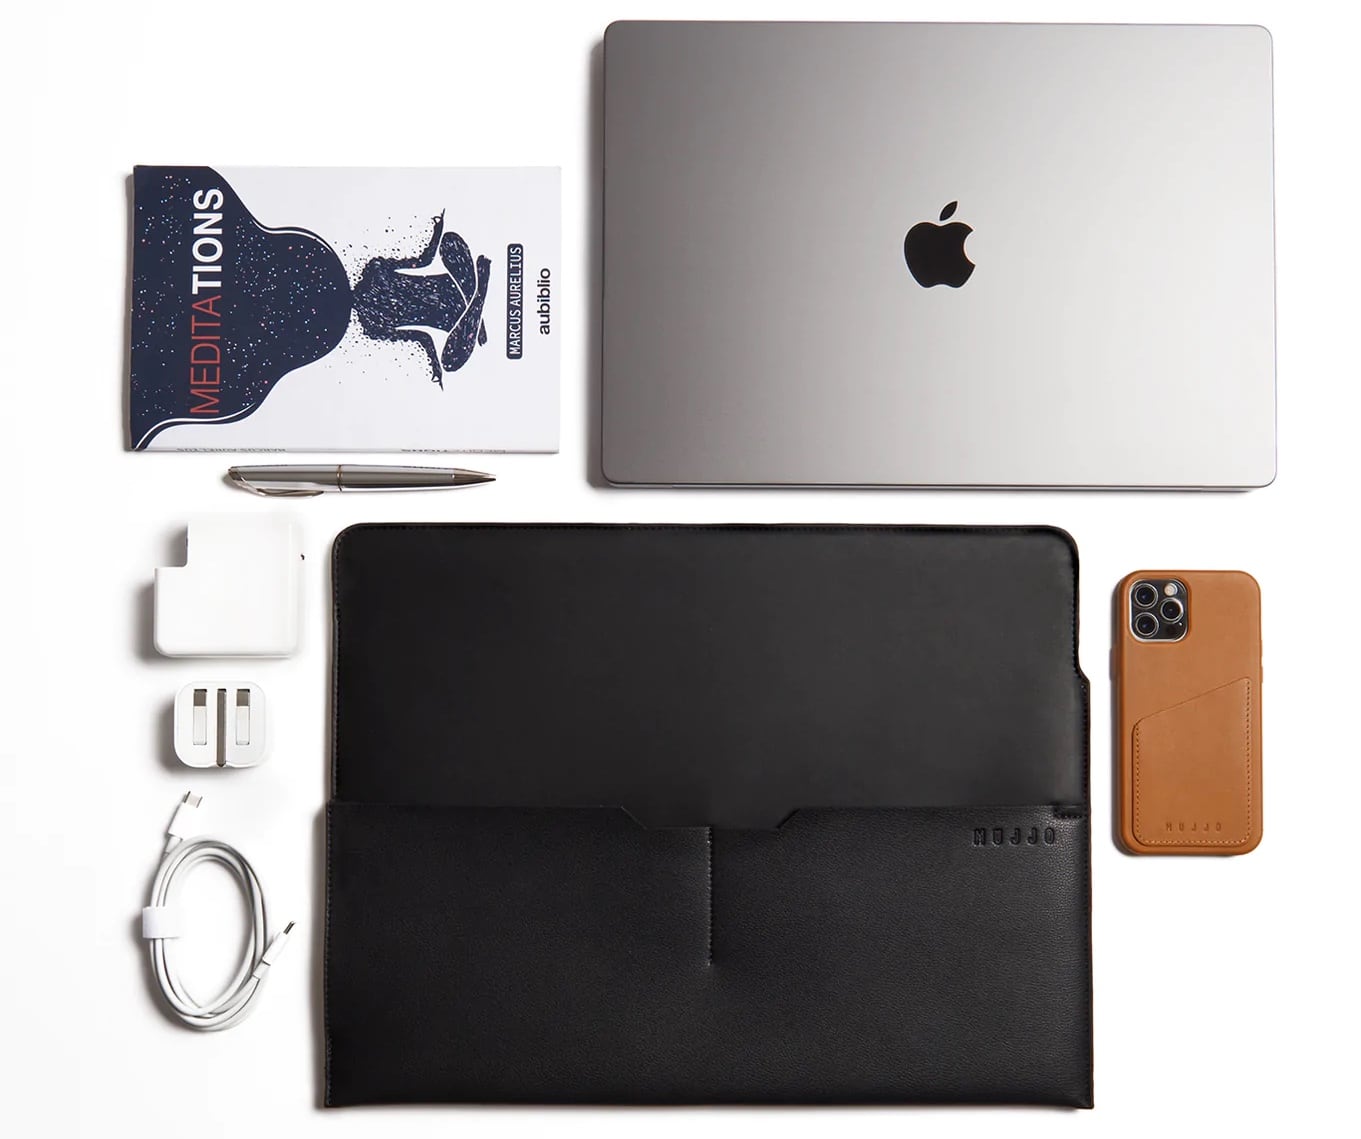 The sleeve is for your MacBook Pro, but you can carry a lot more in it.